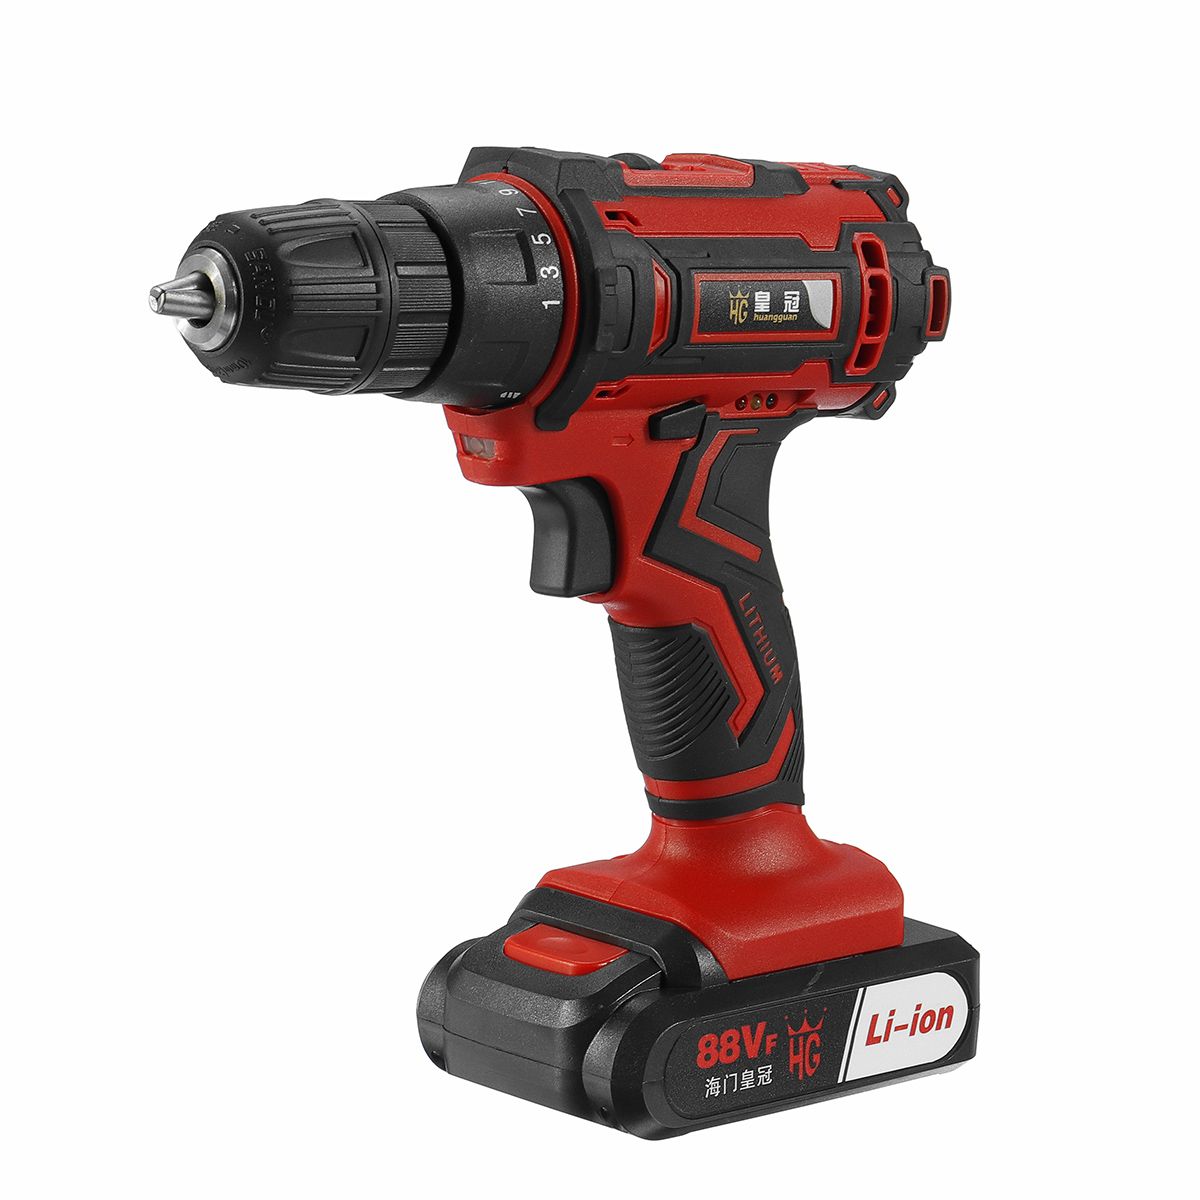 251-Lithium-Electric-Drill-10mm-Power-Drilling-Tool-Cordless-Drill-With-1-Or-2-Li-ion-Batteries-1531612